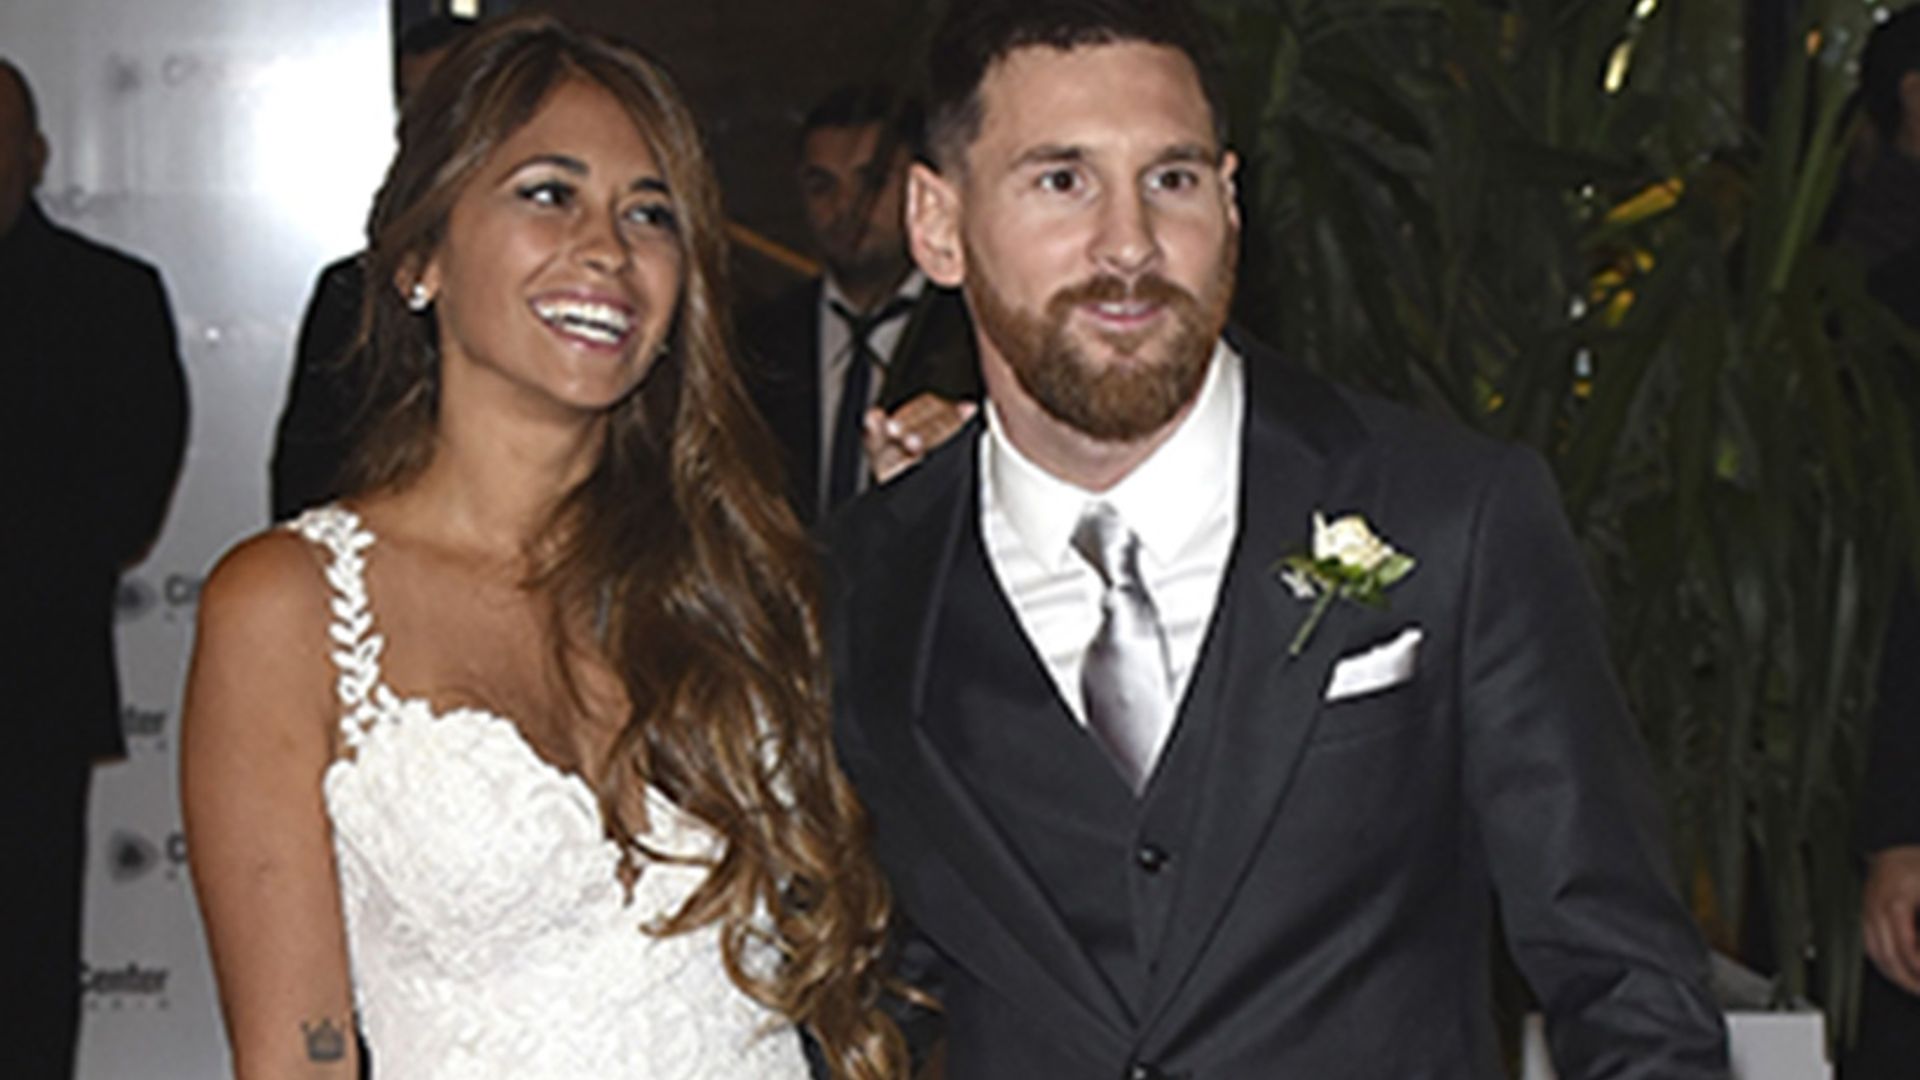 Football star Leo Messi marries childhood sweetheart Antonela Roccuzzo in stunning Argentina ceremony